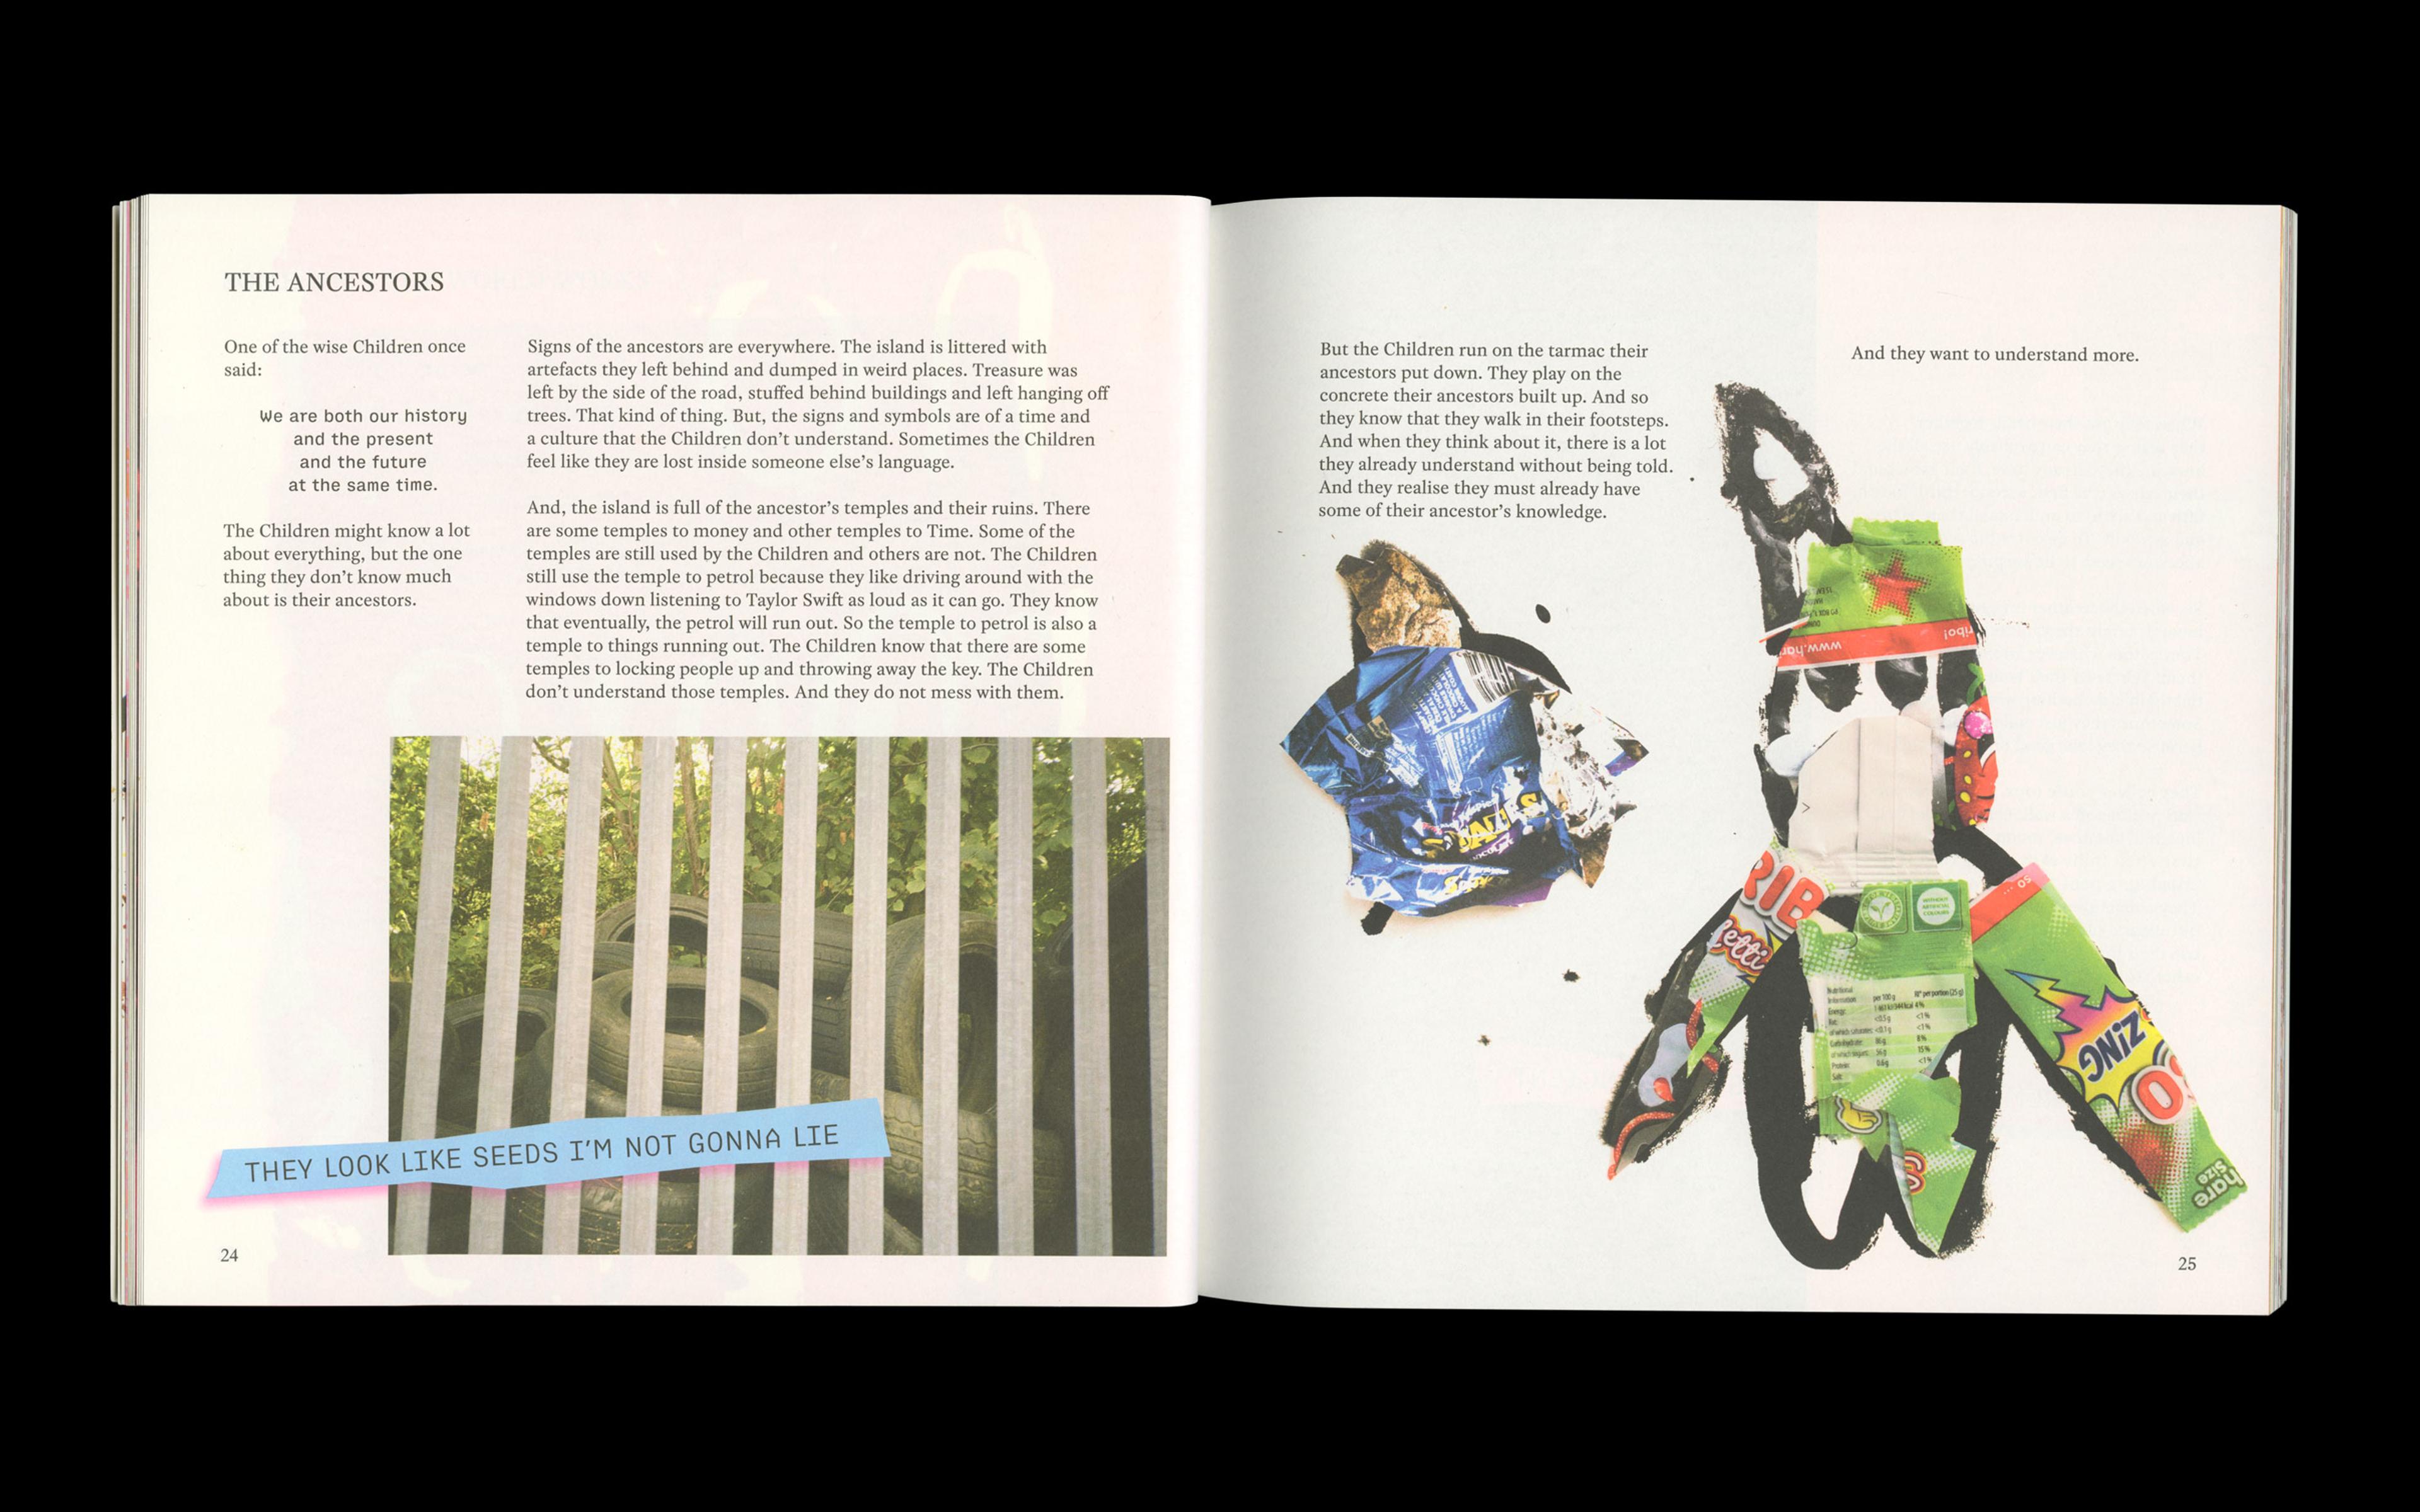 Scan of internal spread from The Brightness of Juju by Dunya Kalantery and Rima Patel showing text and photo collages